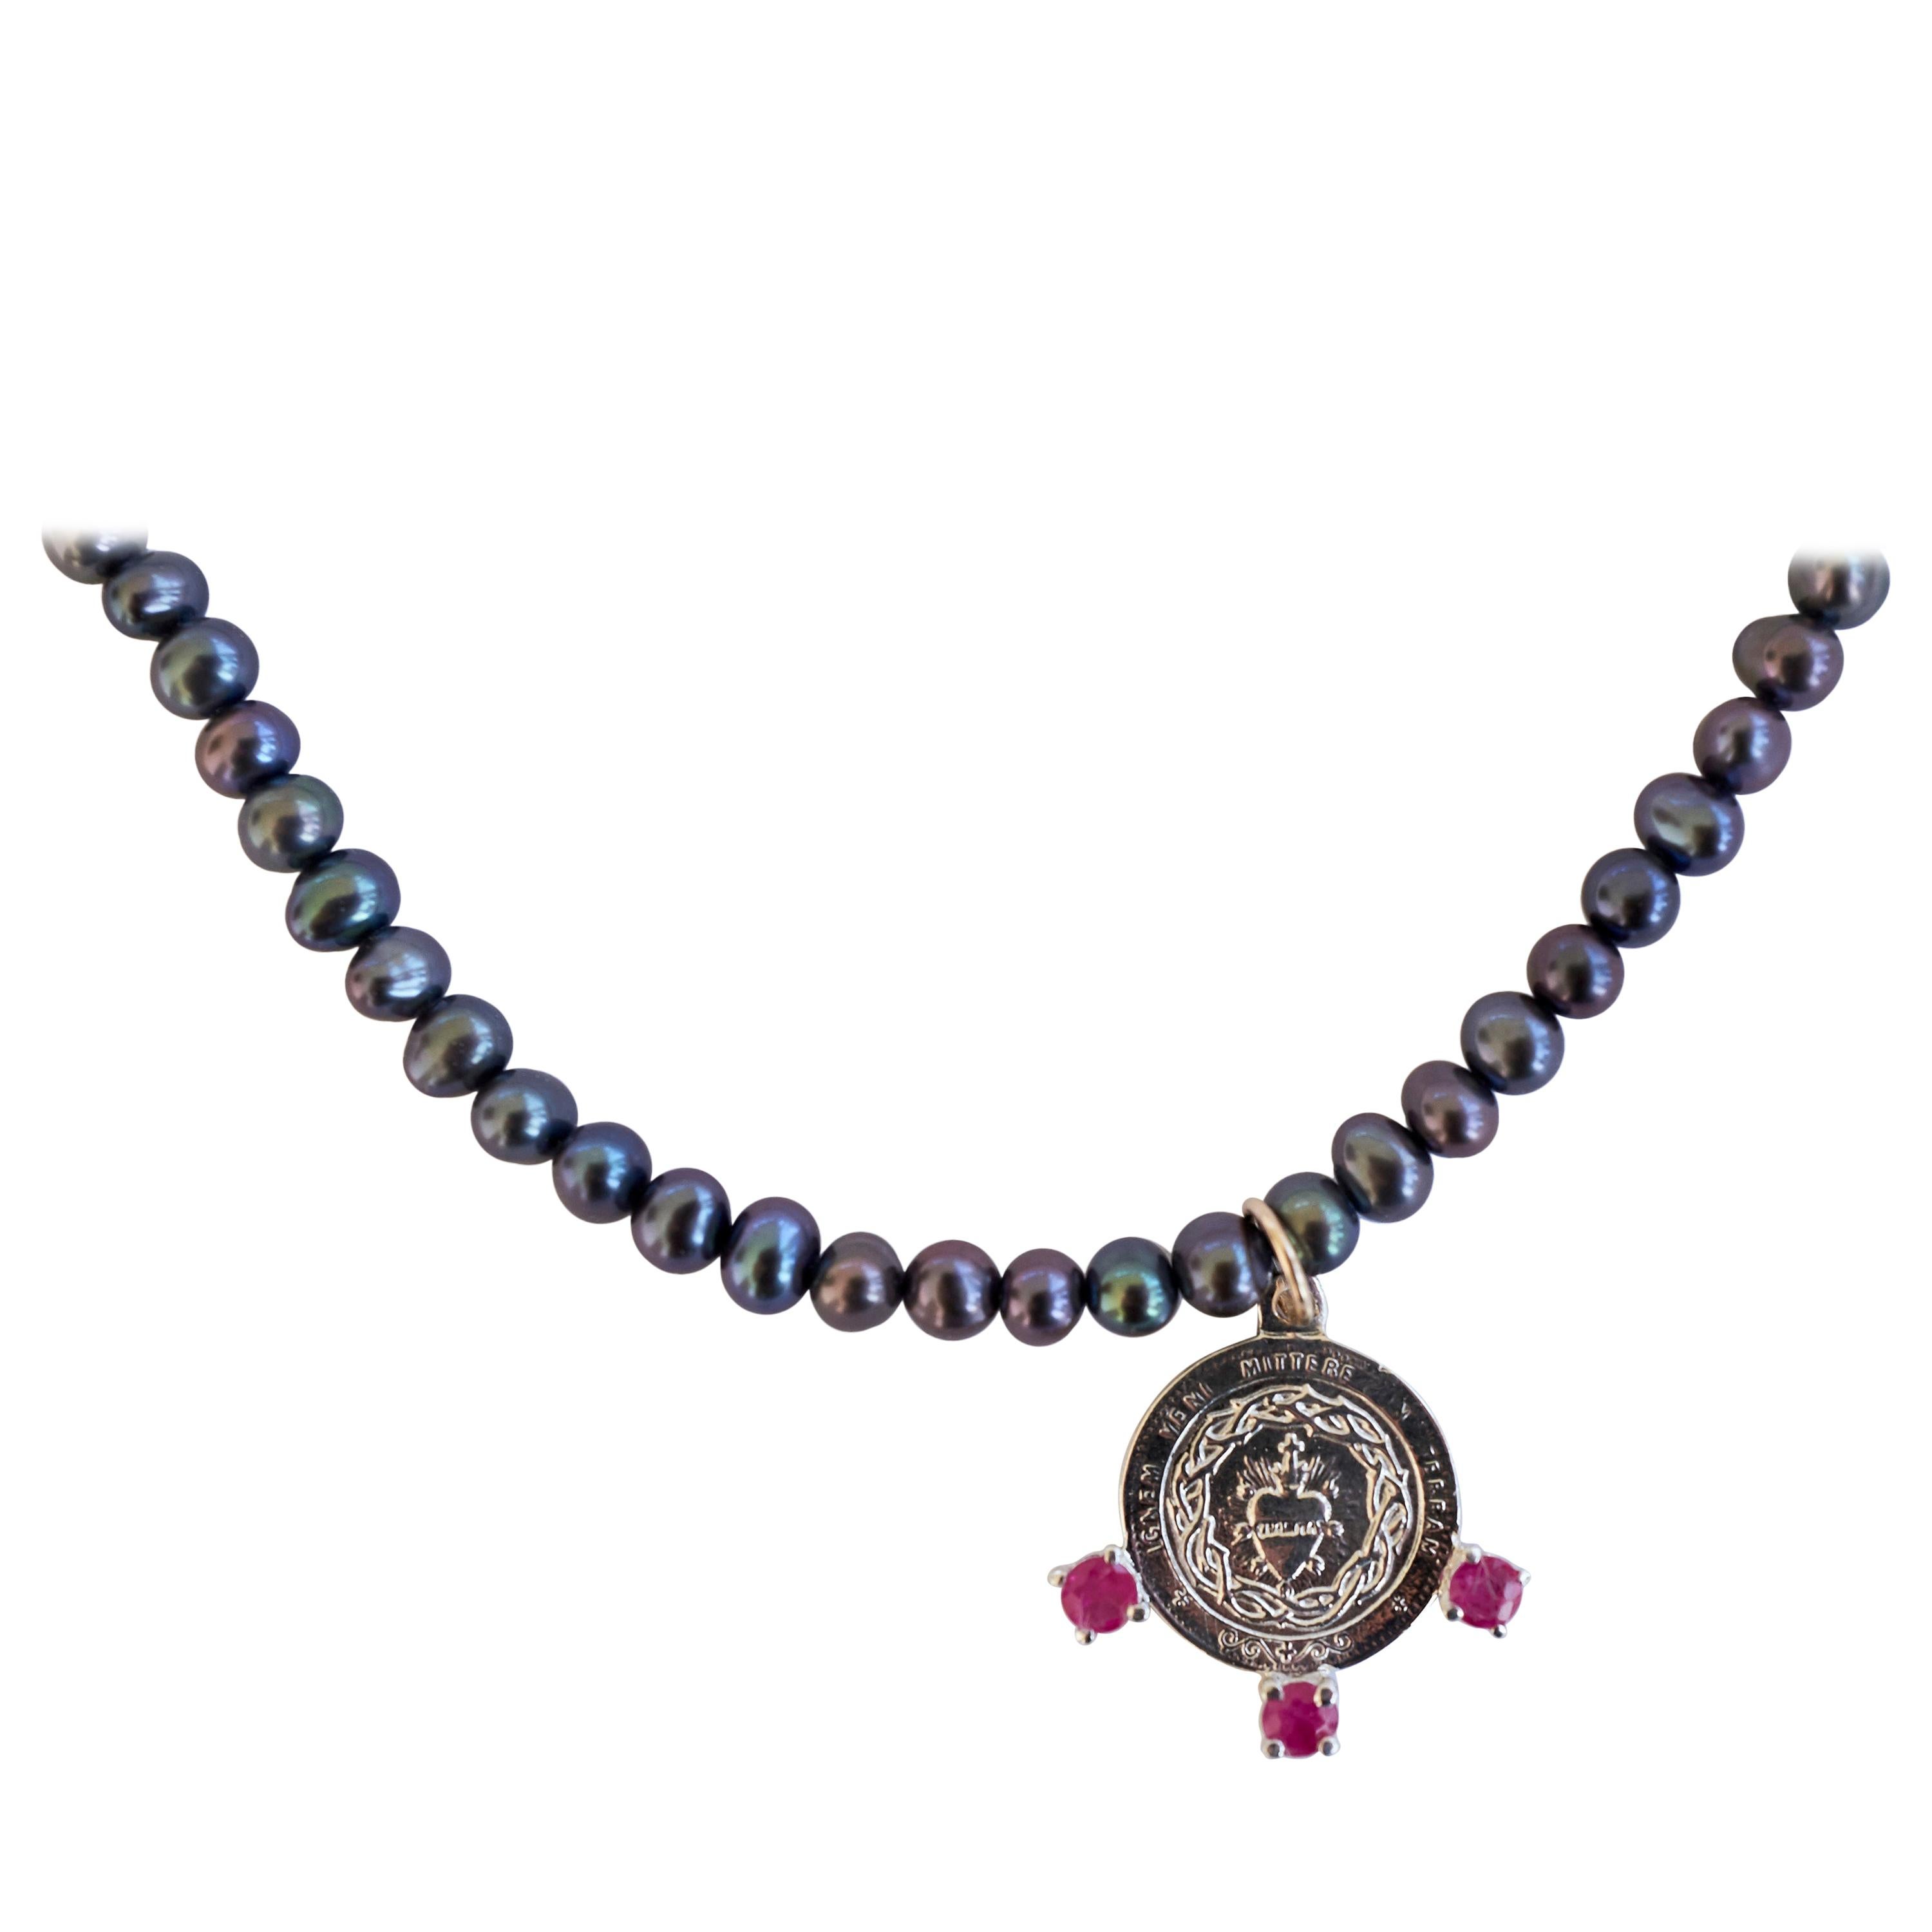 Black Pearl Chain Necklace Medal Sacred Heart Pink Tourmaline J Dauphin